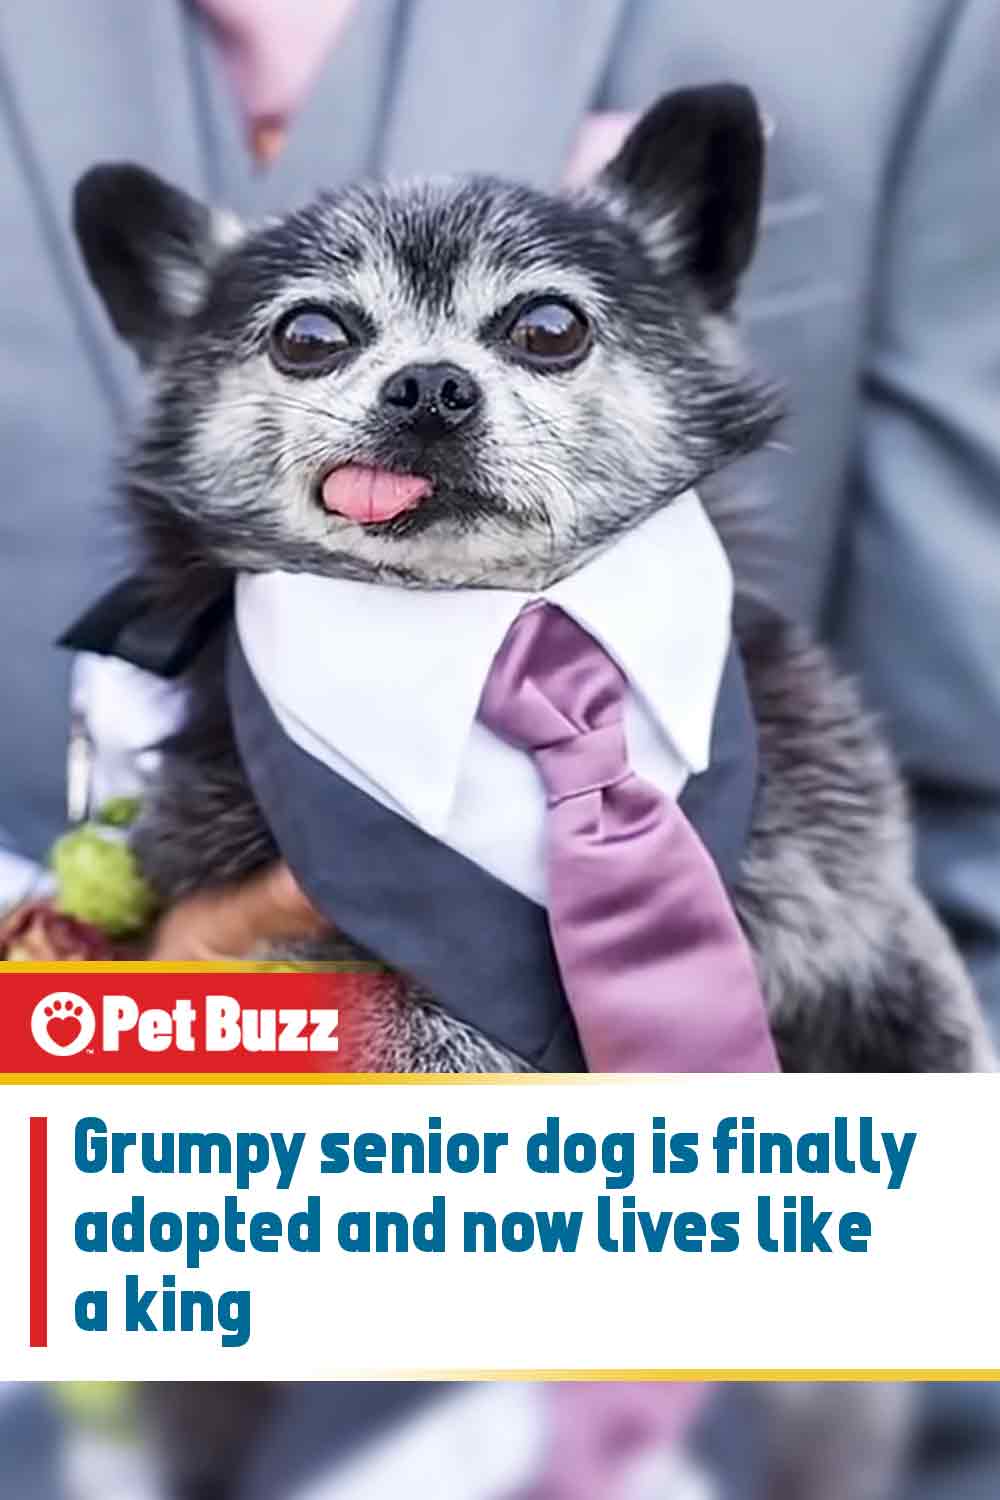 Grumpy senior dog is finally adopted and now lives like a king